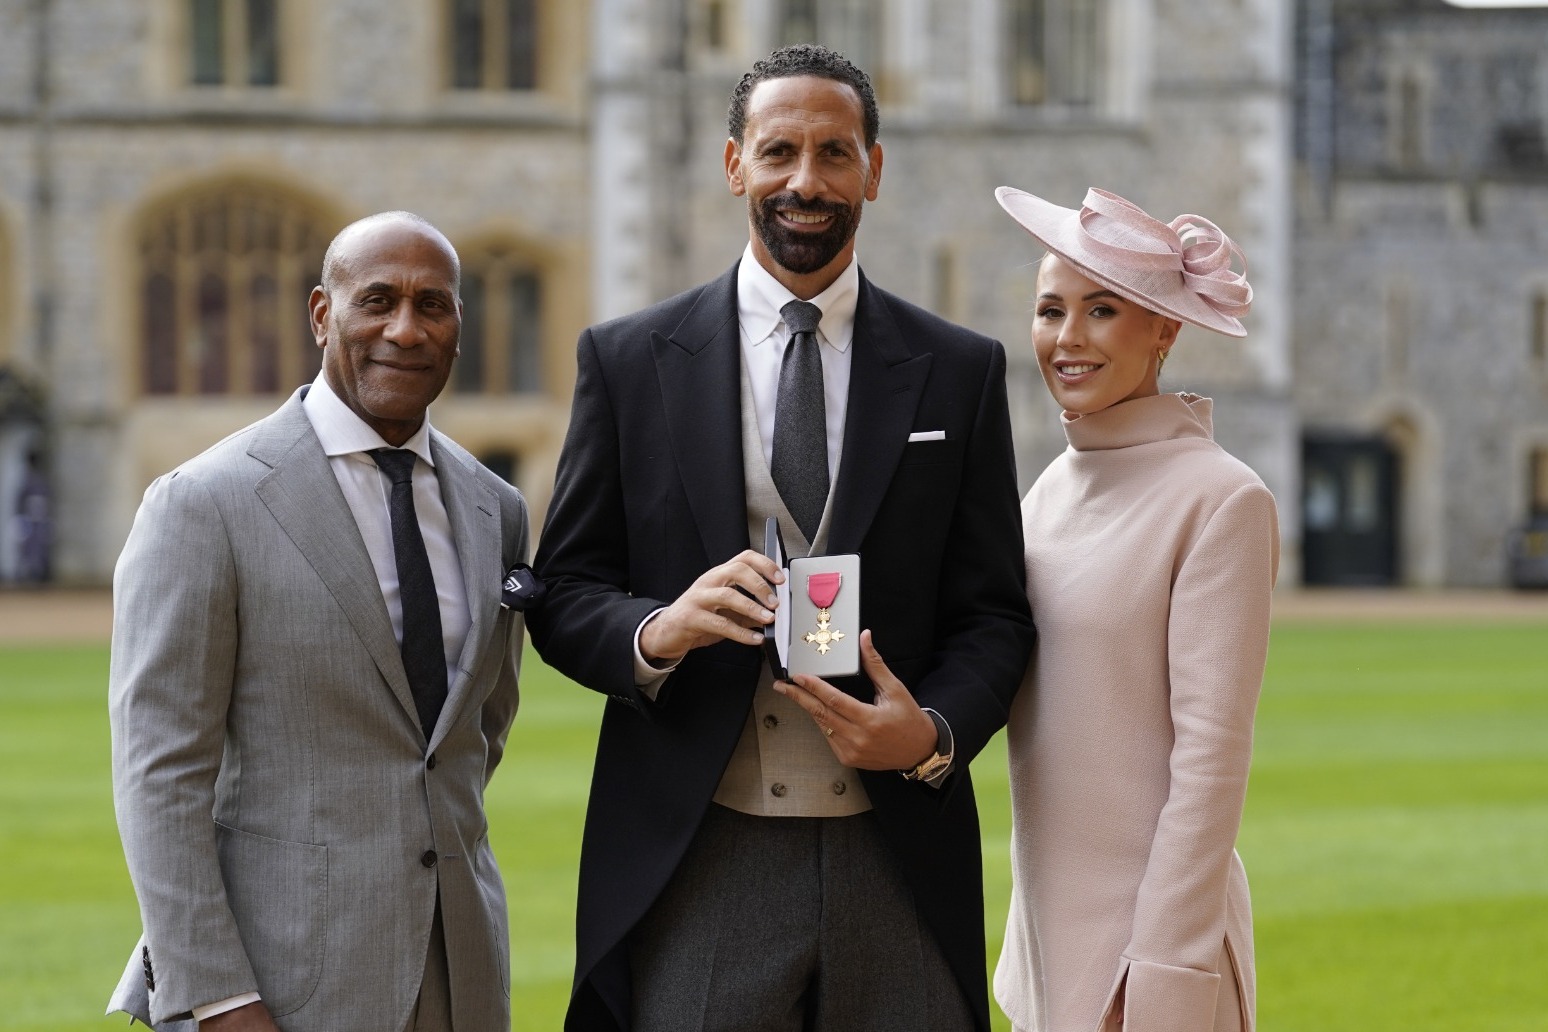 Ferdinand reflects on work to create ‘positive change’ as he collects OBE honour 